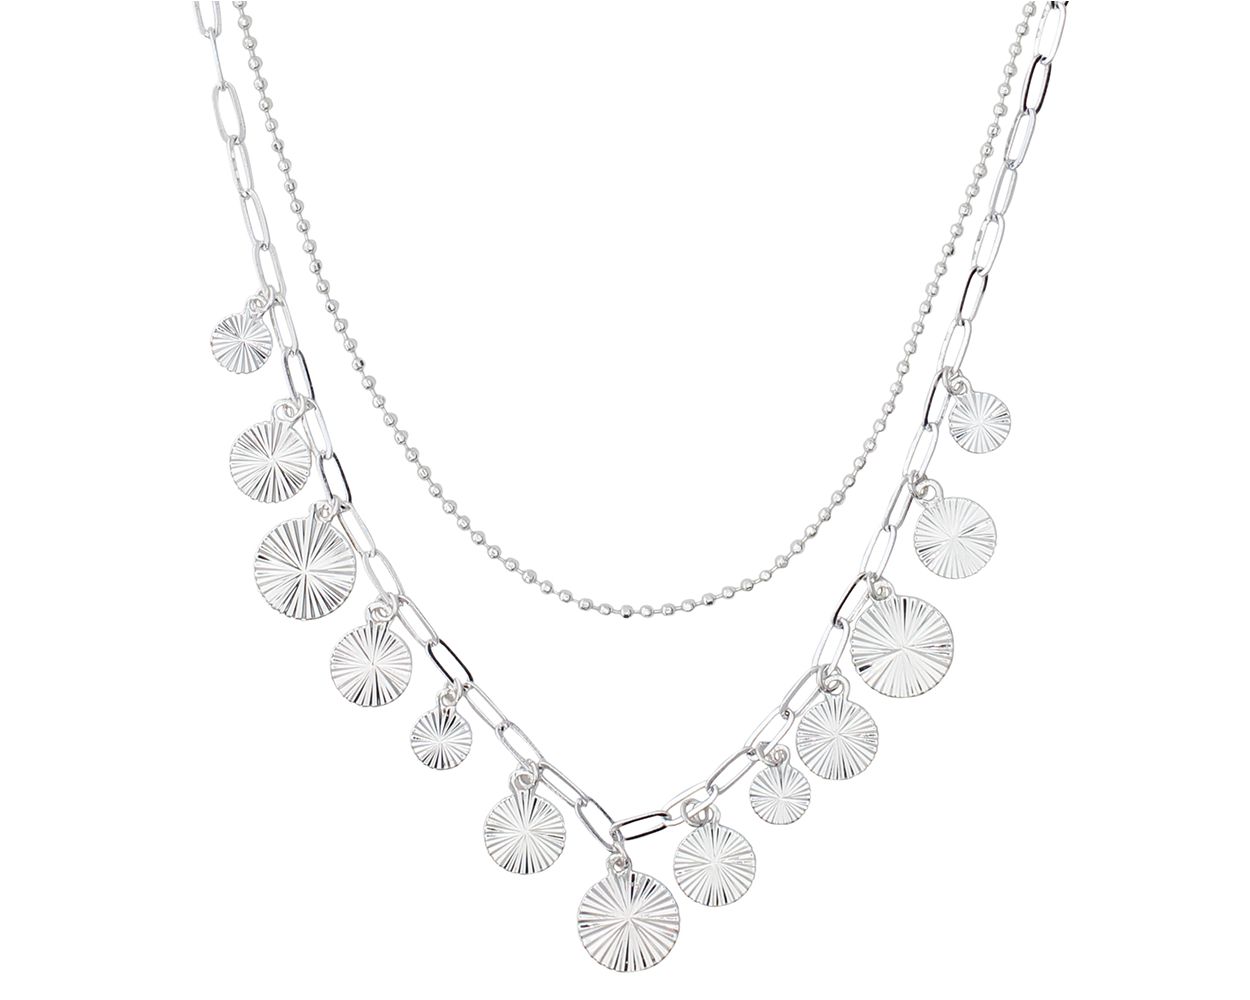 SILVER RADIAL DISCS NECKLACE